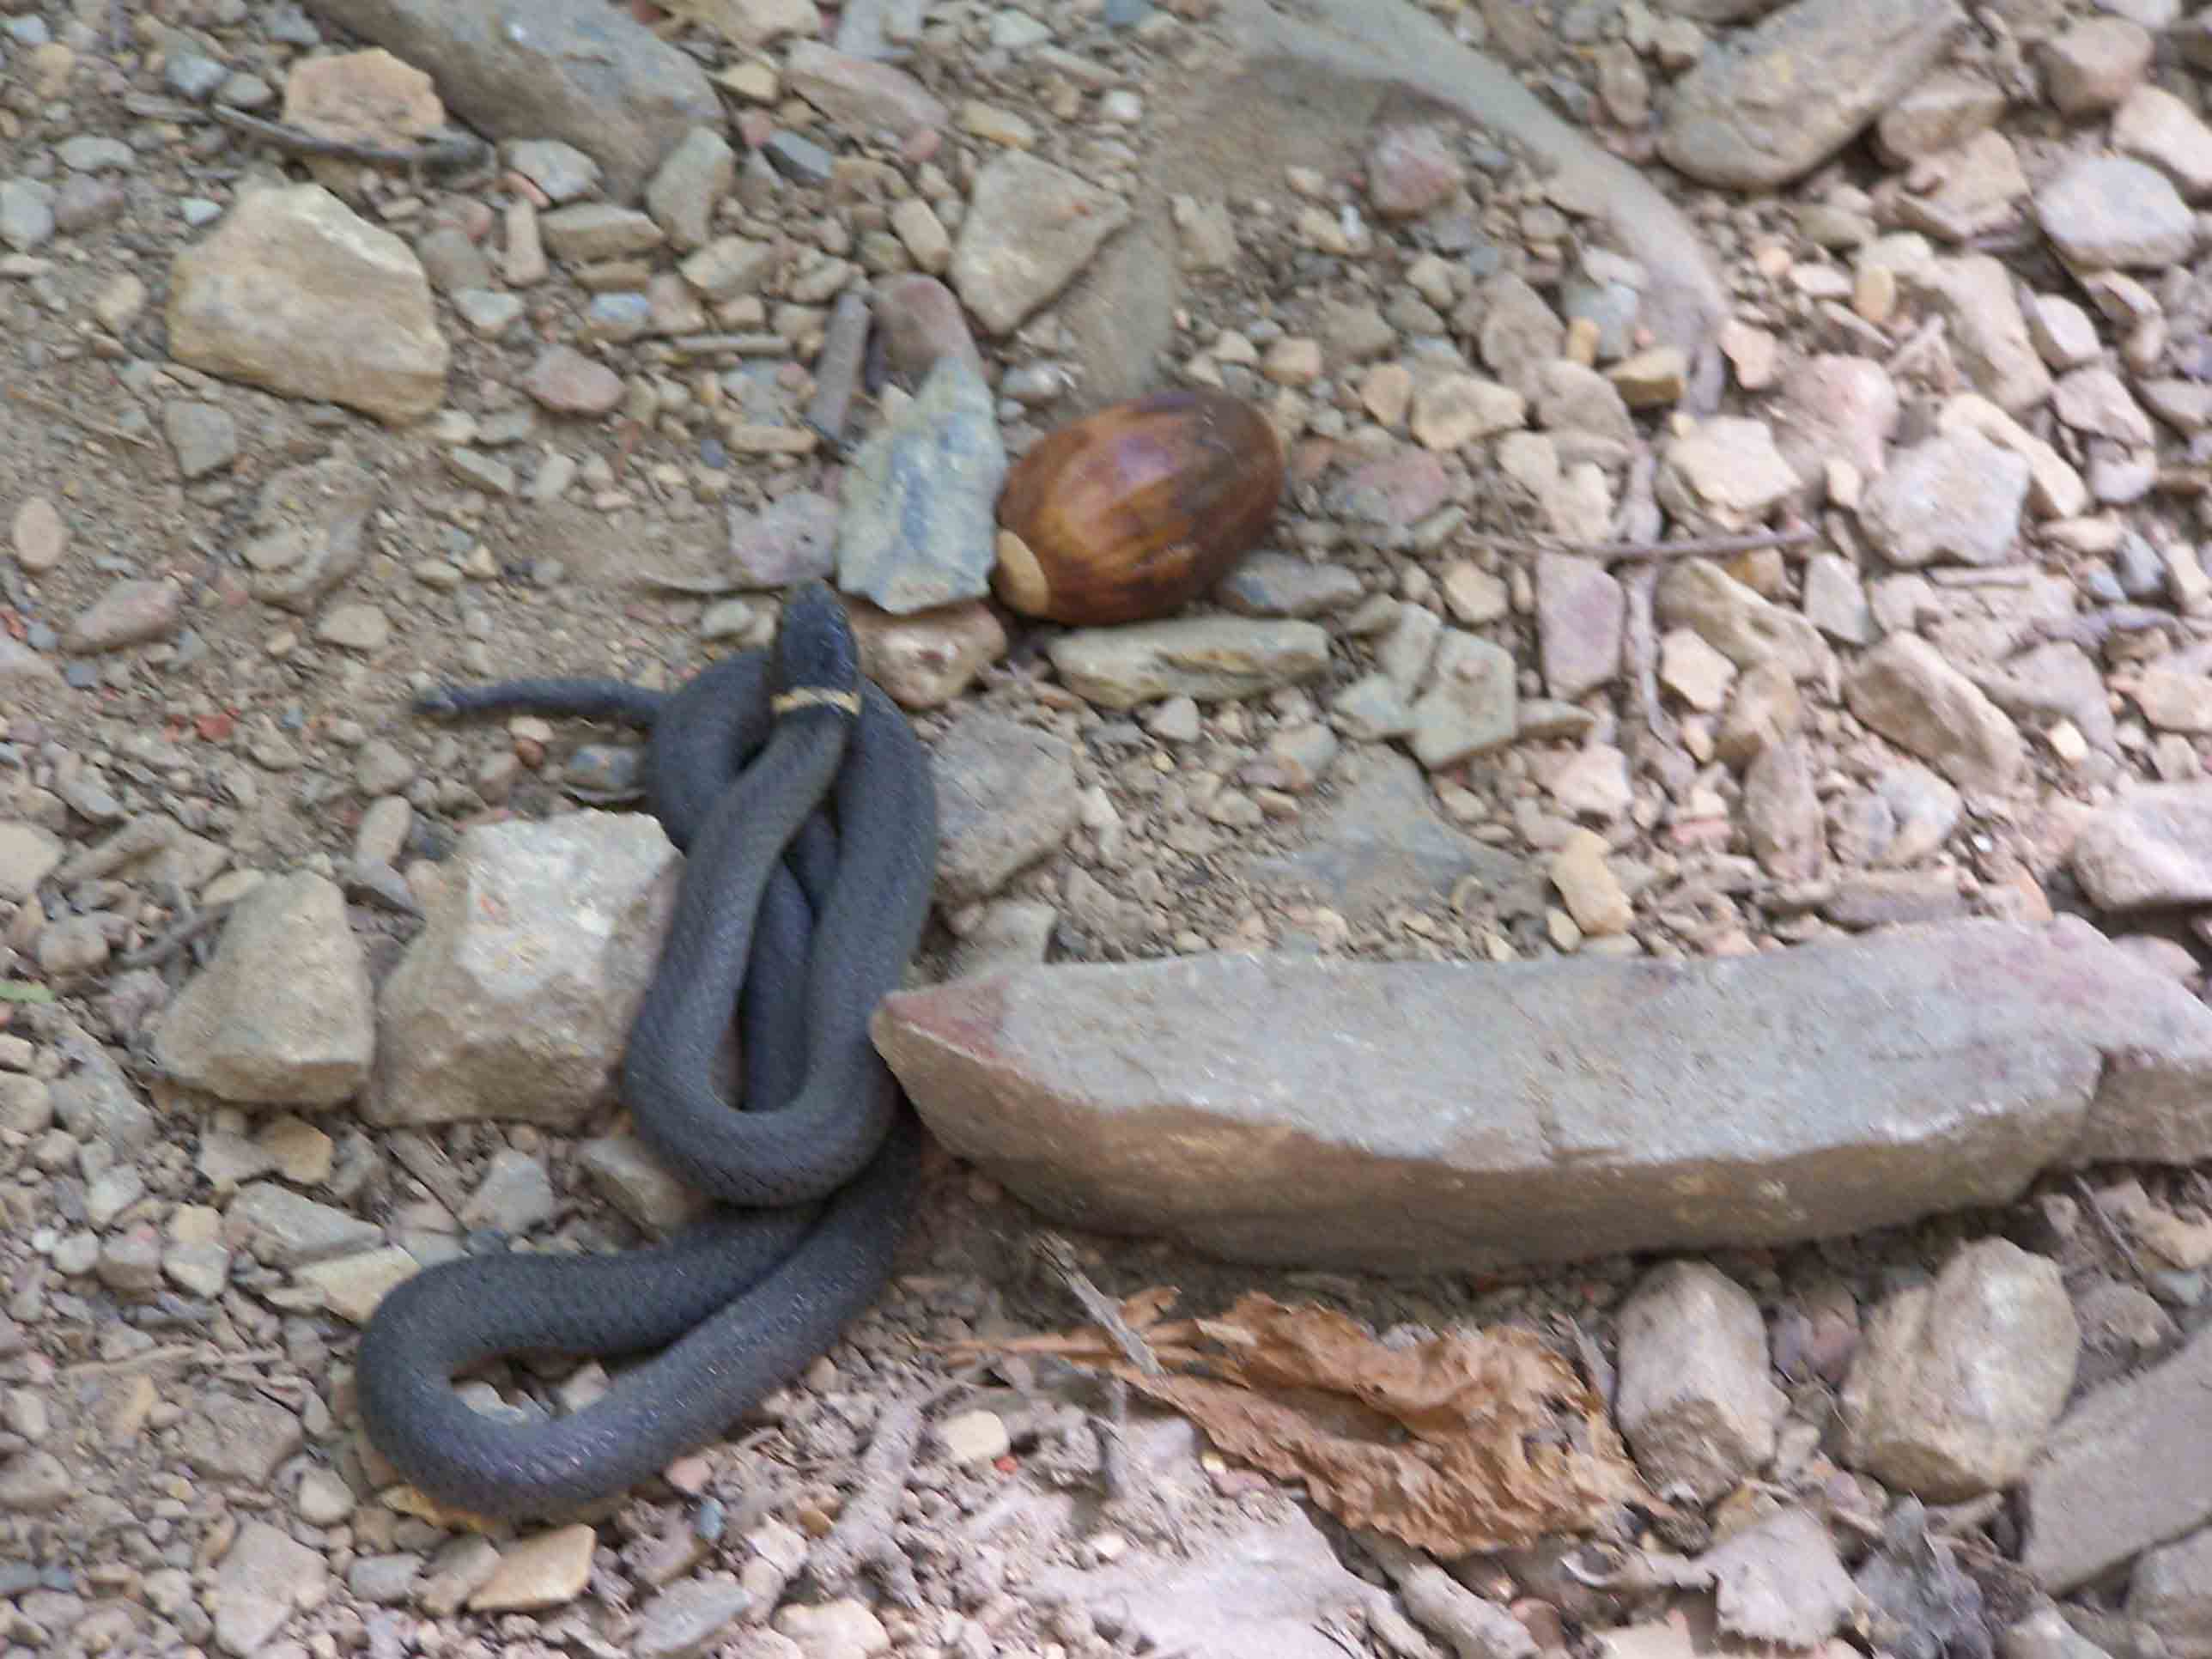 Trail visitor - Northern Ring-necked snake. Courtesy at@rohland.org